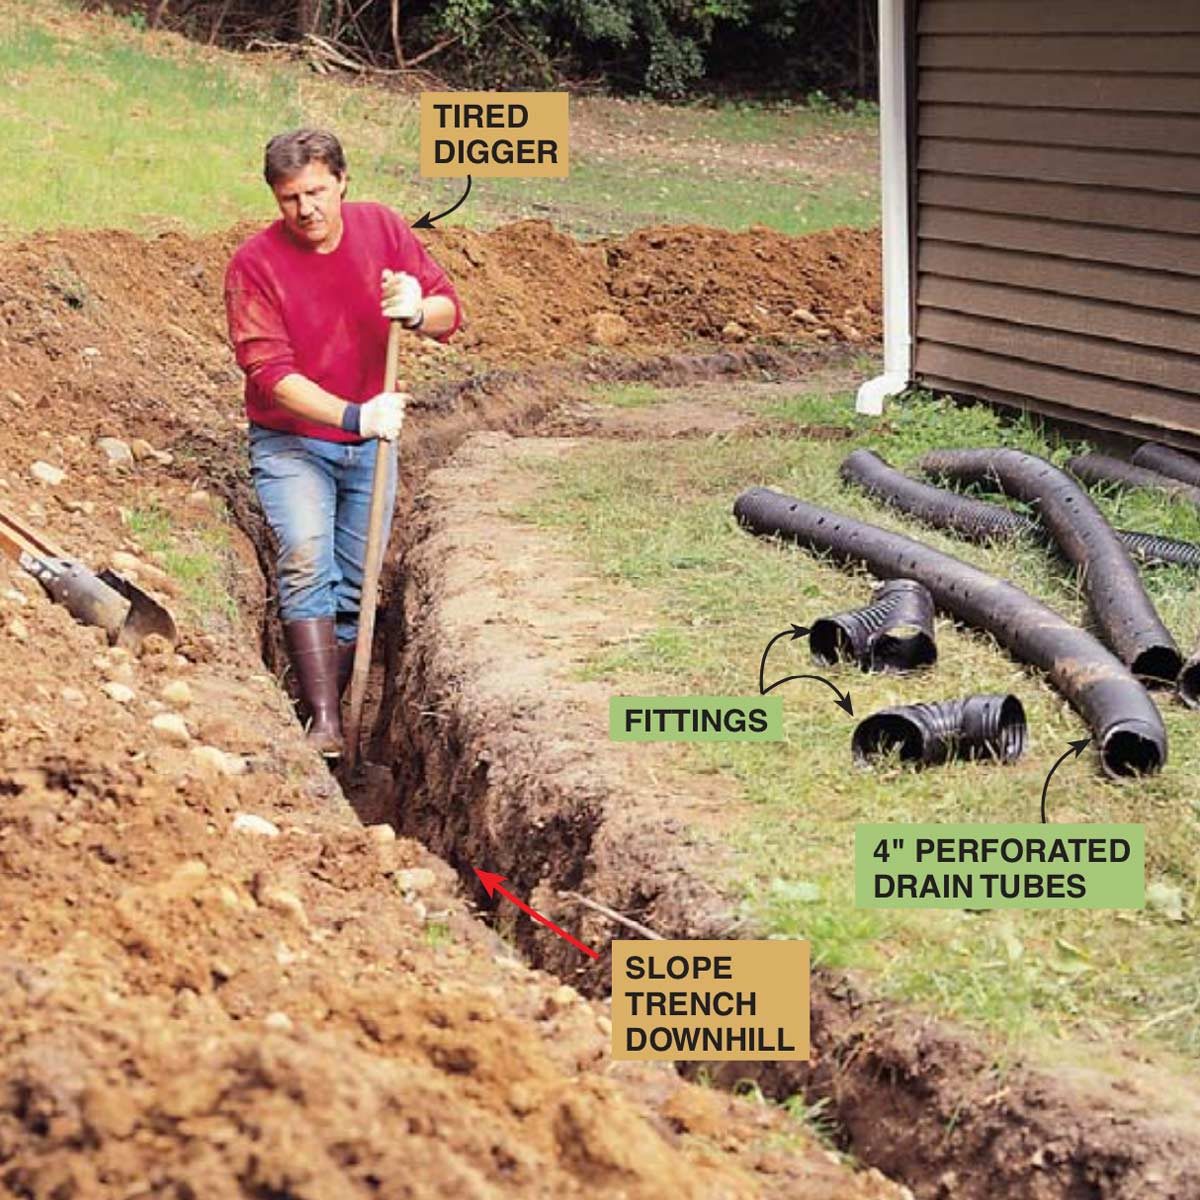  Install an In-Ground Drainage System